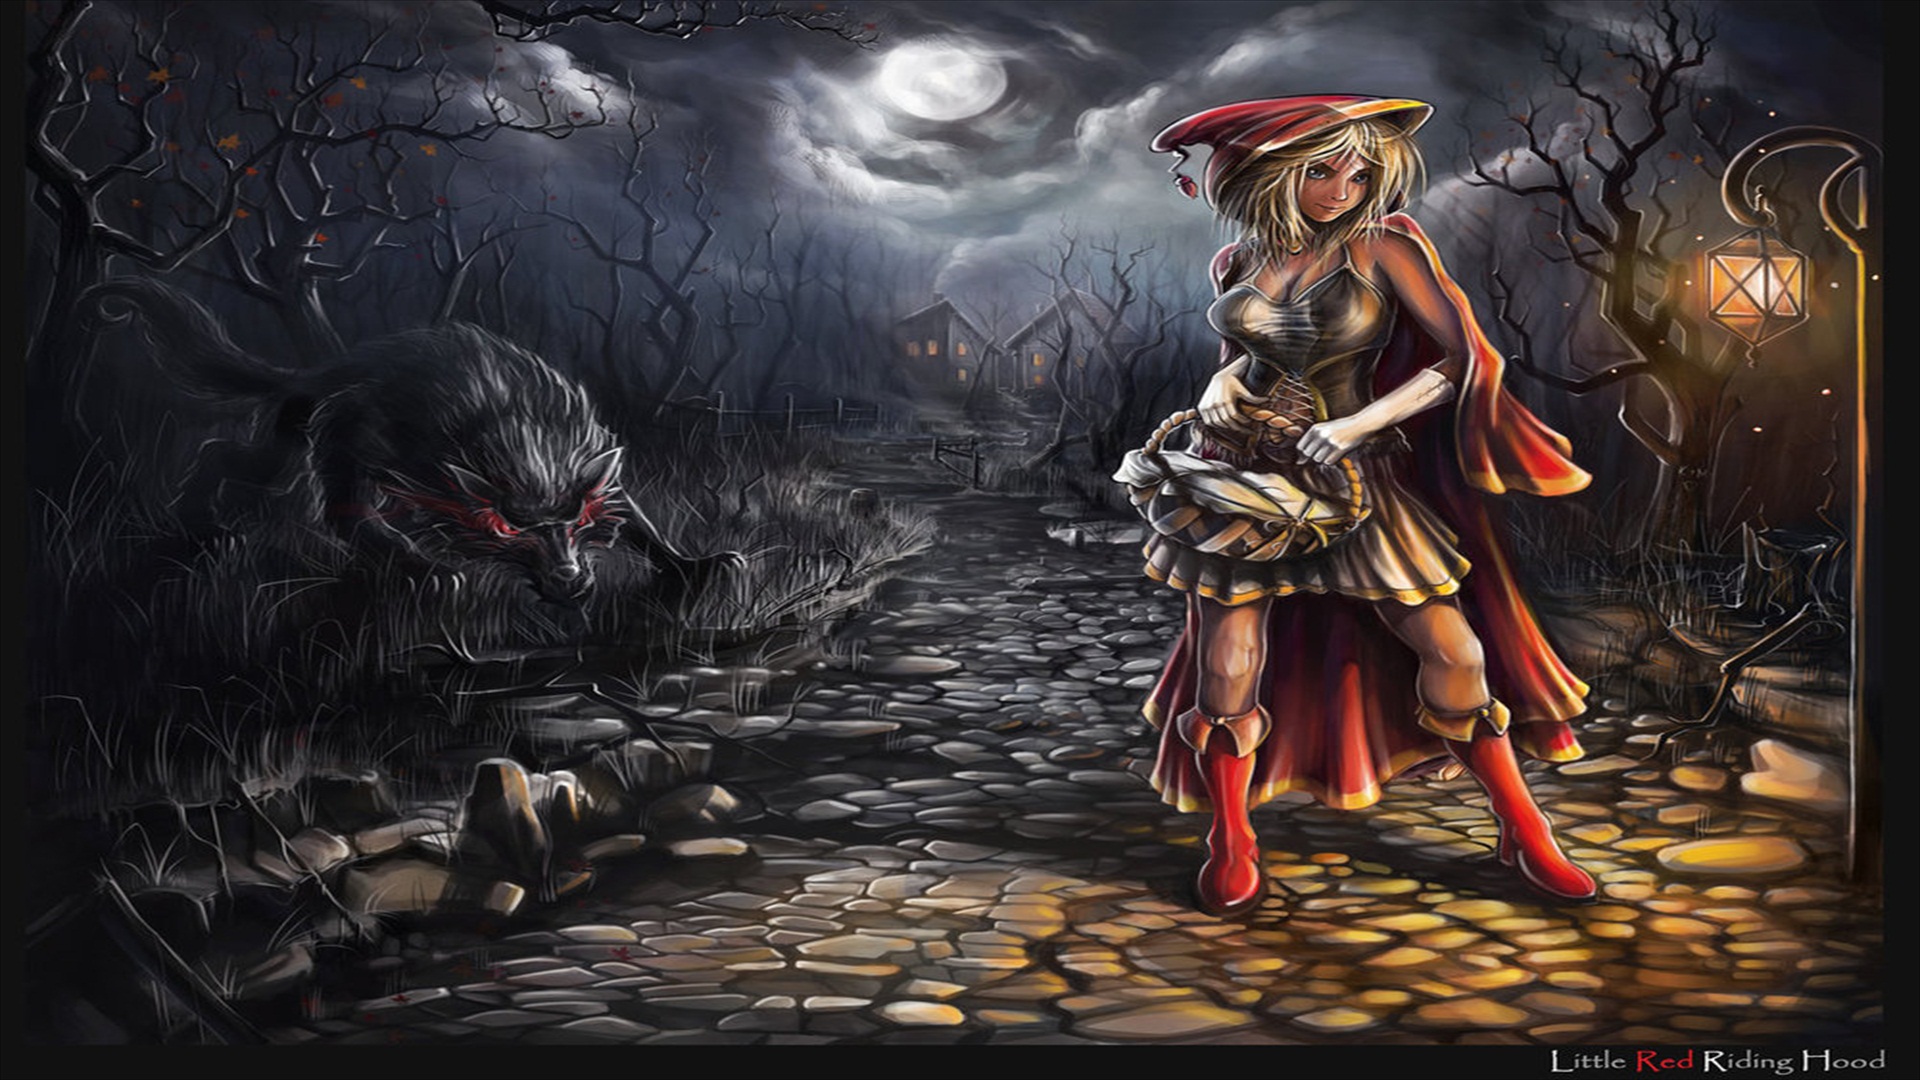 A mystical illustration featuring Red Riding Hood in a fantasy world.